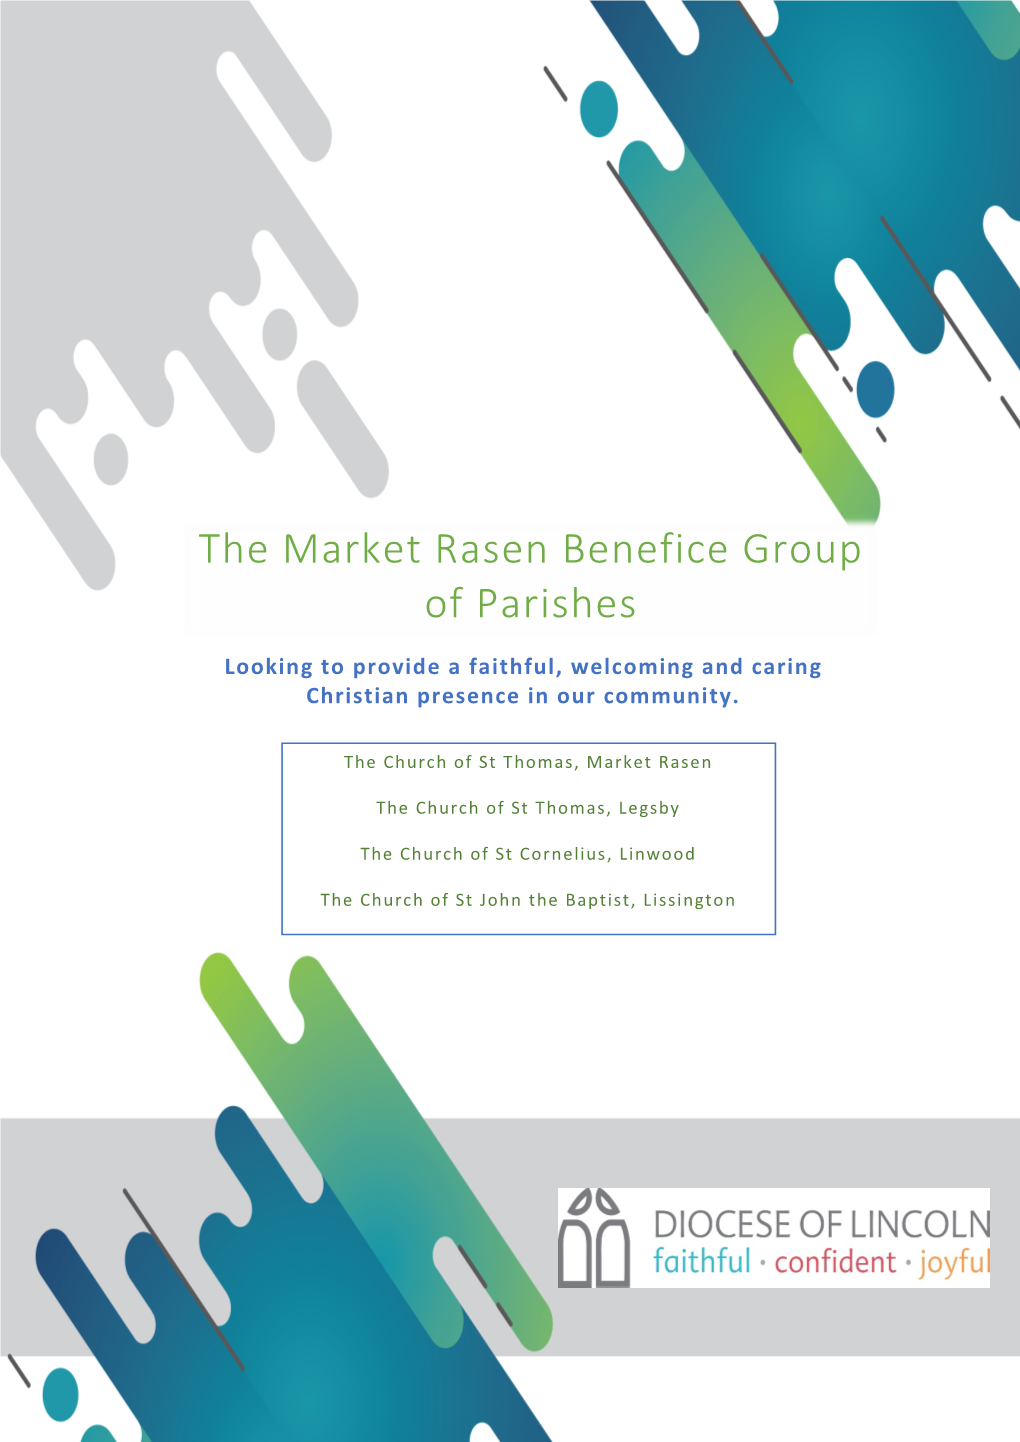 The Market Rasen Benefice Group of Parishes